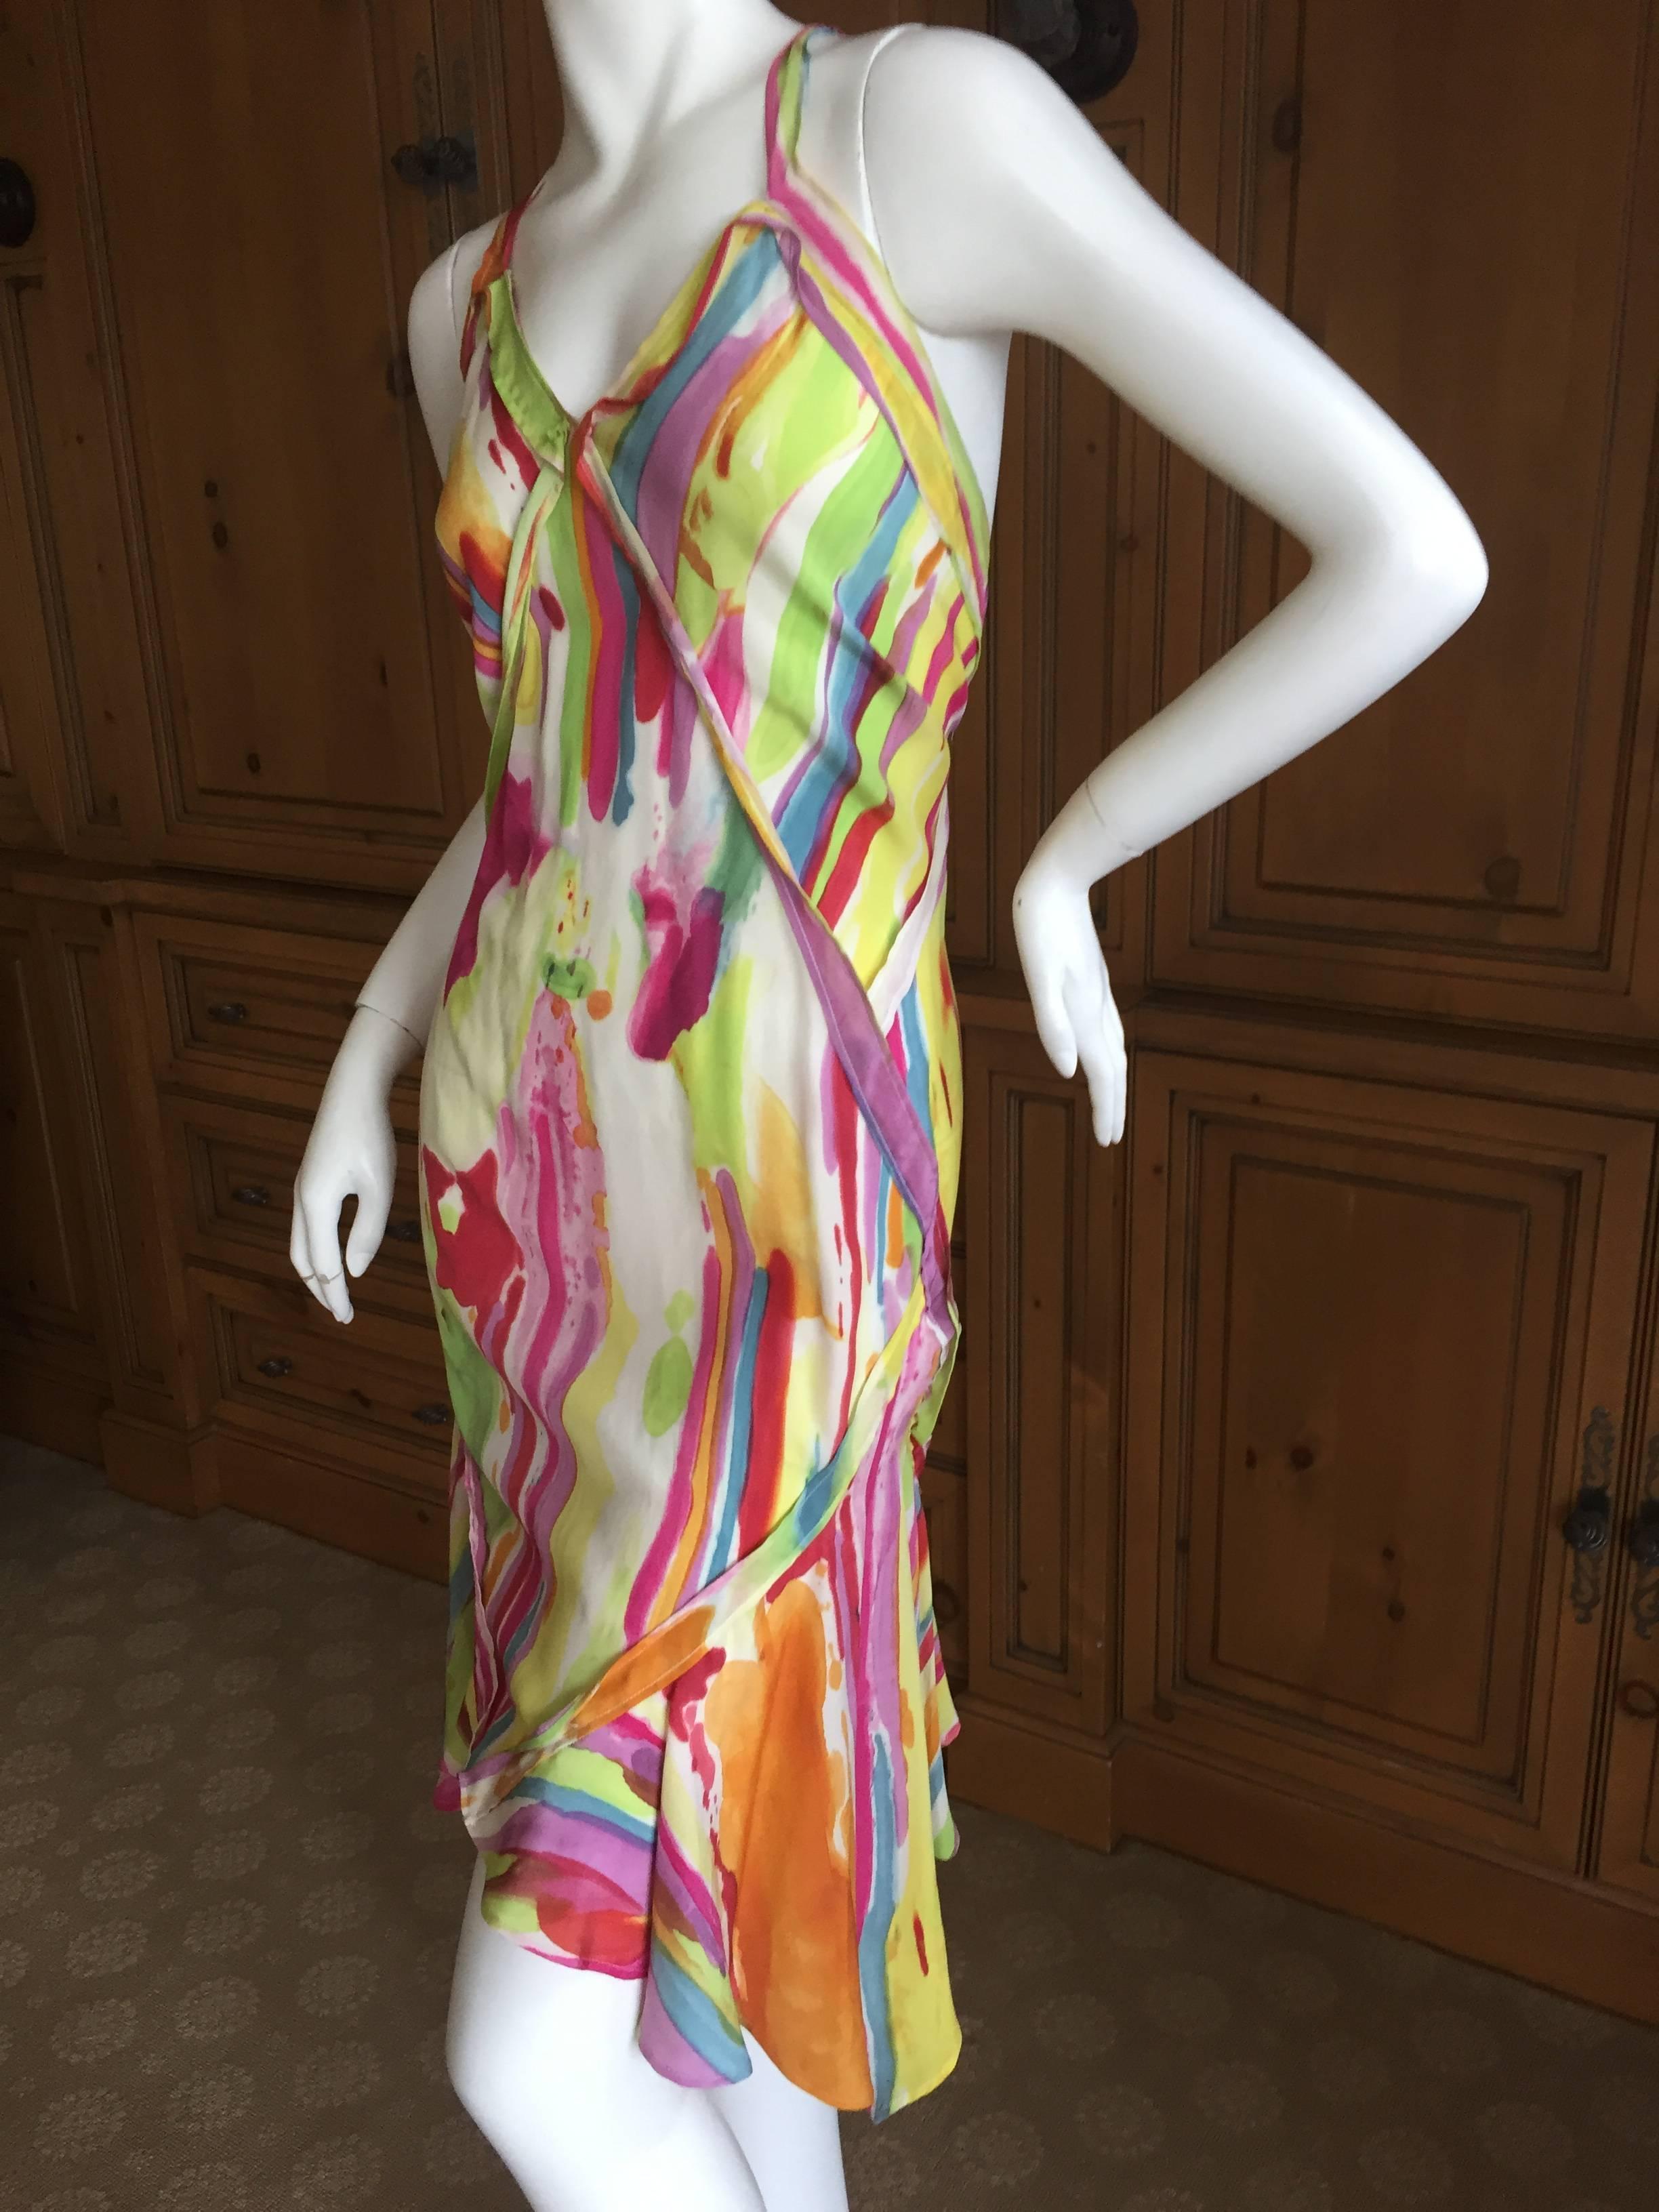 Yves Saint Laurent Rive Guache Watercolor Silk Ruffle Dress In Excellent Condition For Sale In Cloverdale, CA